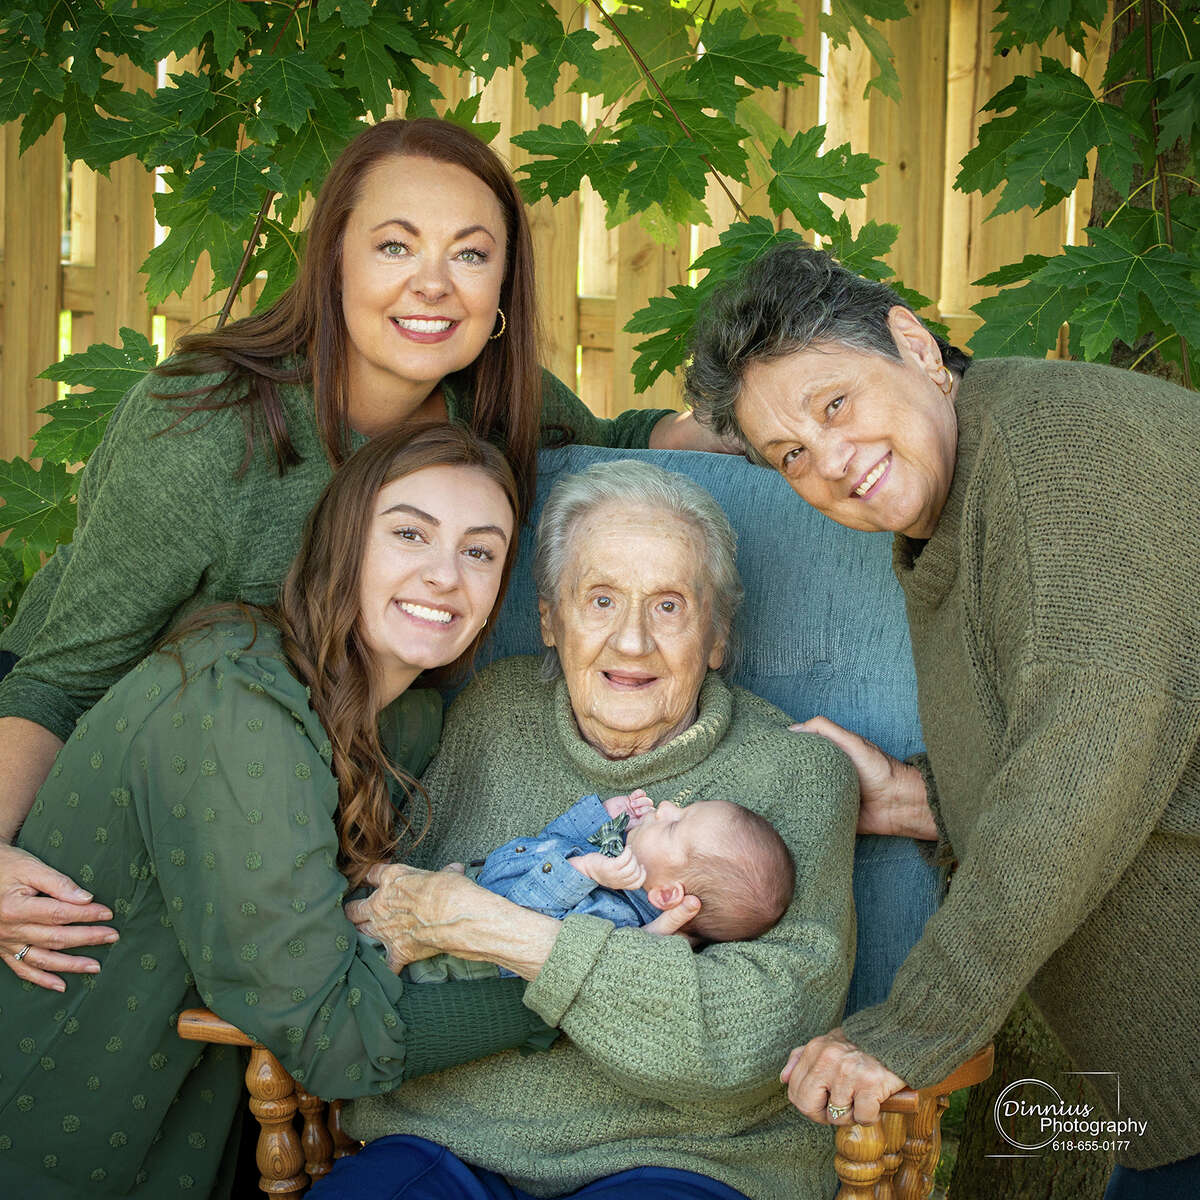 From left to right: Lisa Rogers, 57, Cassidy McDonough, 23, Colter McDonough, 5 months, Ethel Bilbruck, 94 and Judy Osborne, 74